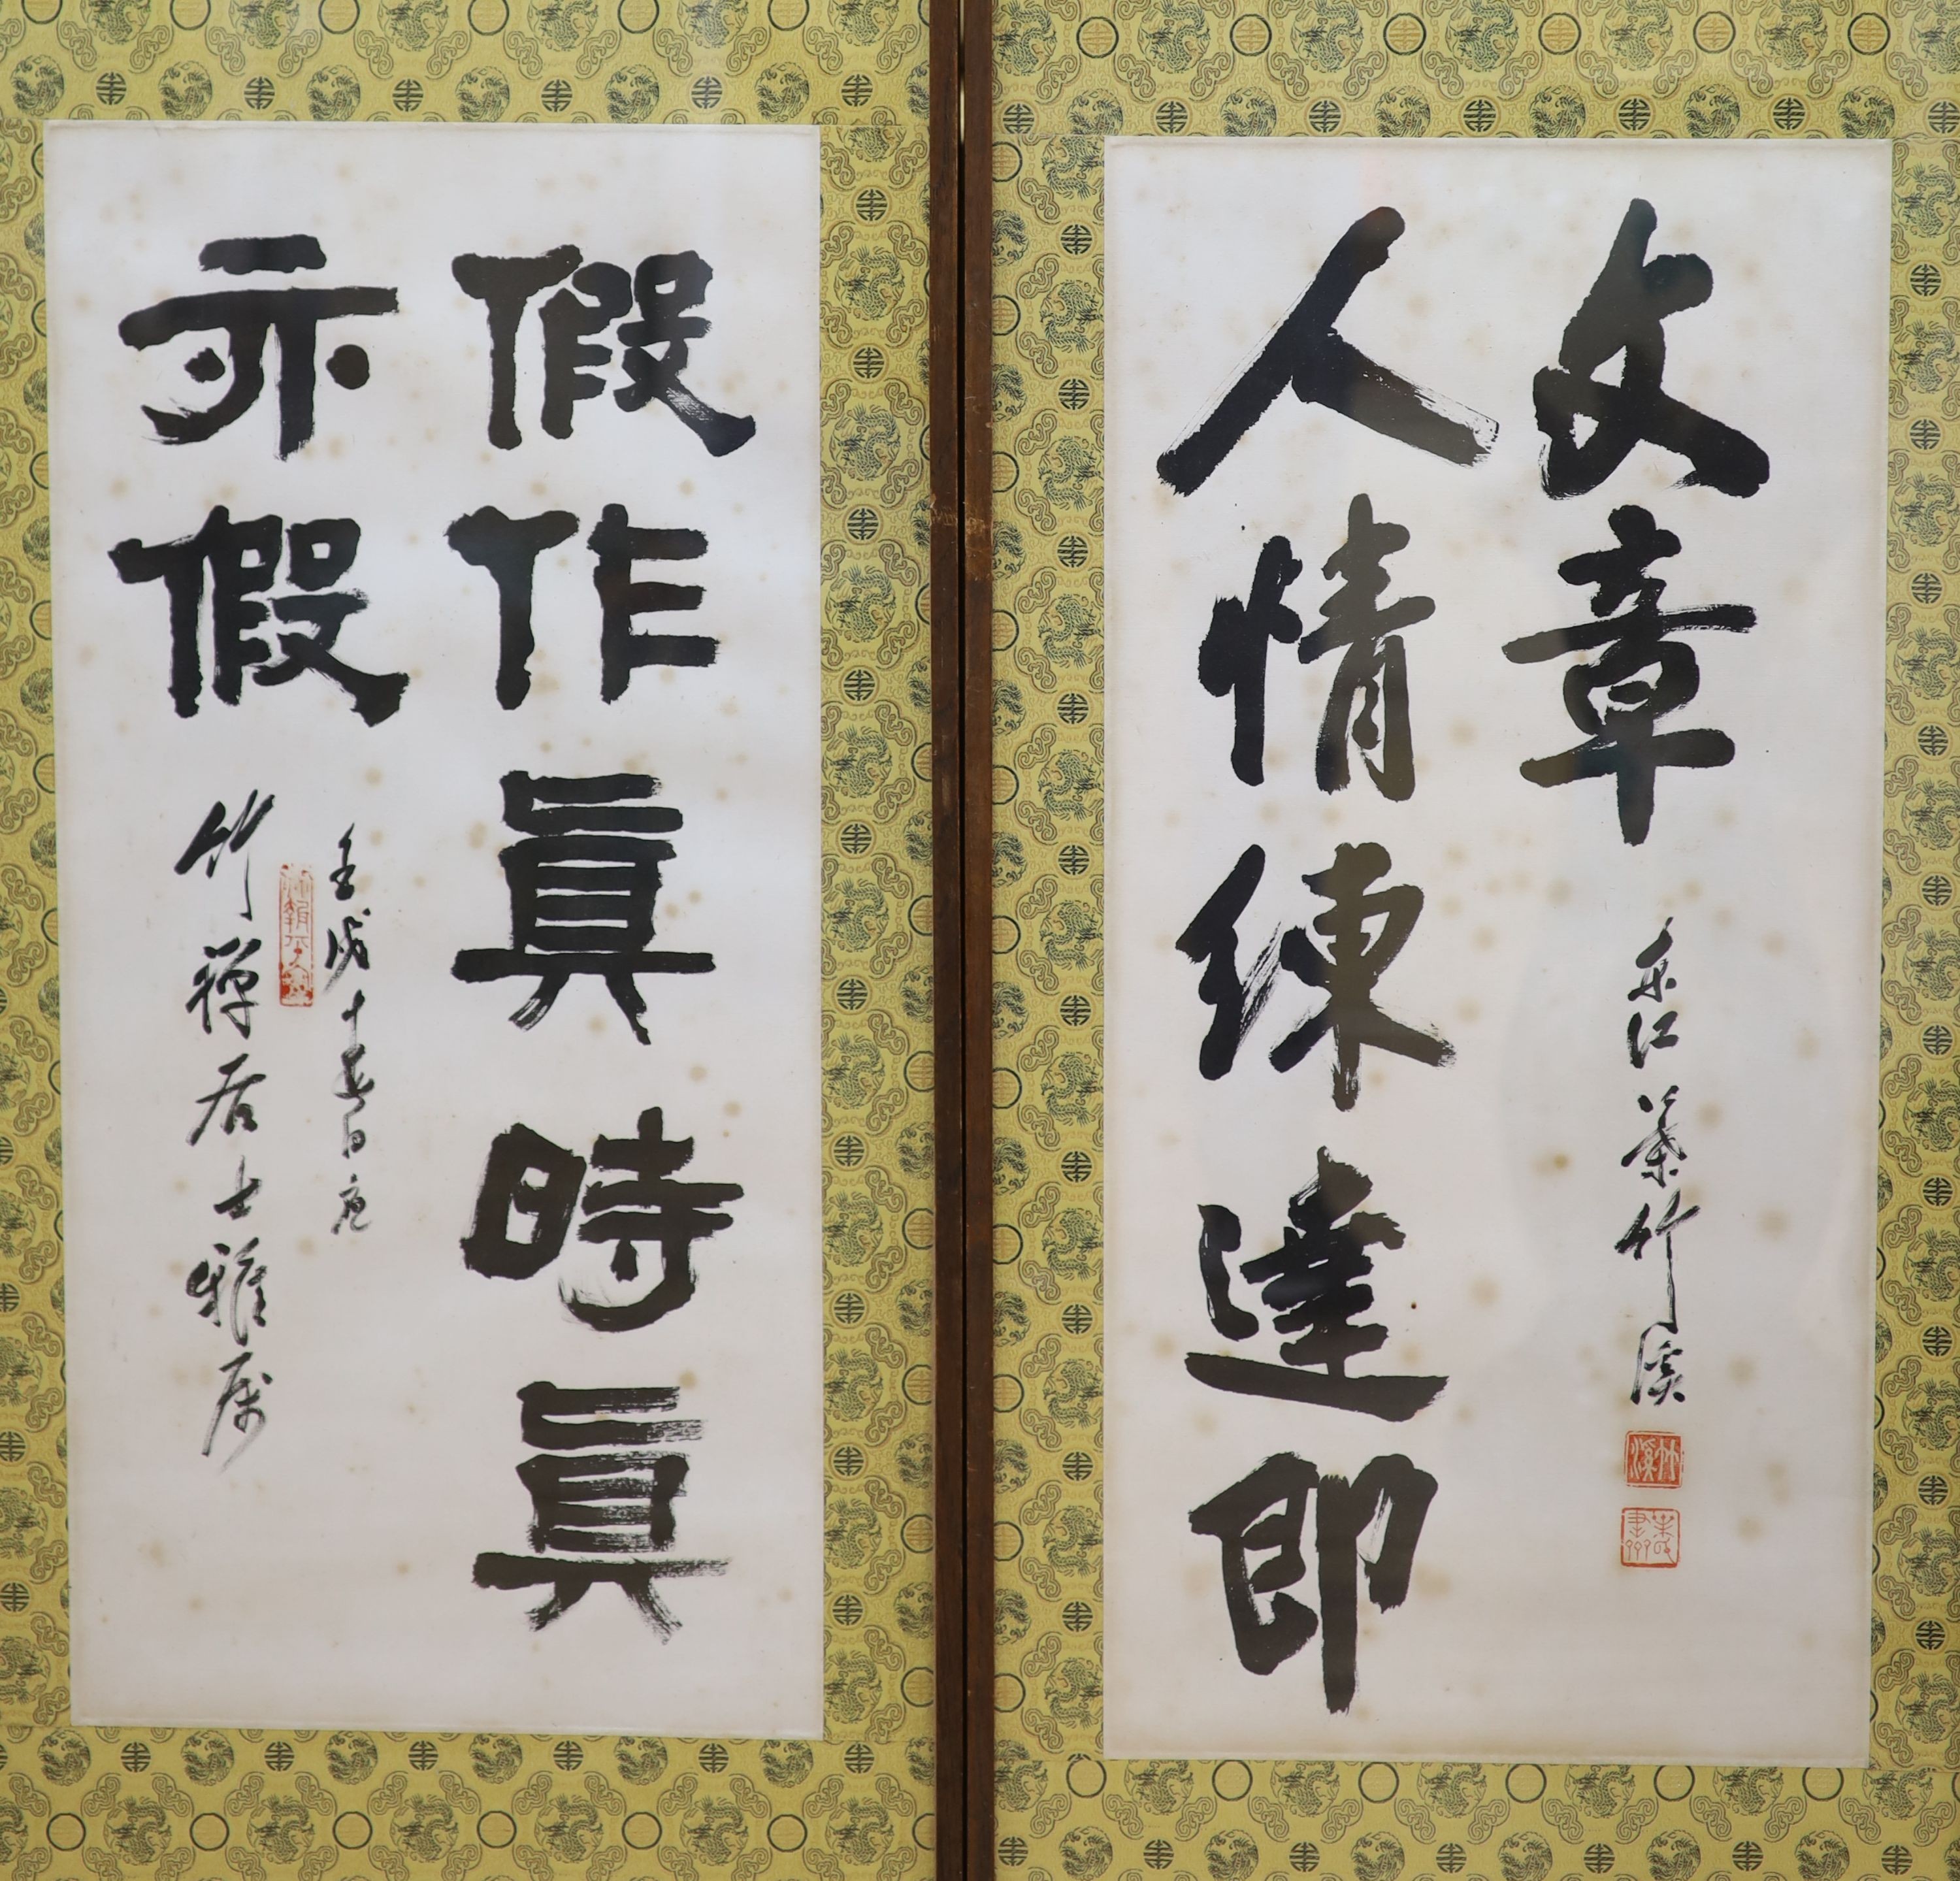 A set of four Chinese calligraphic ink paintings, each 80 x 32 cm excluding brocade borders